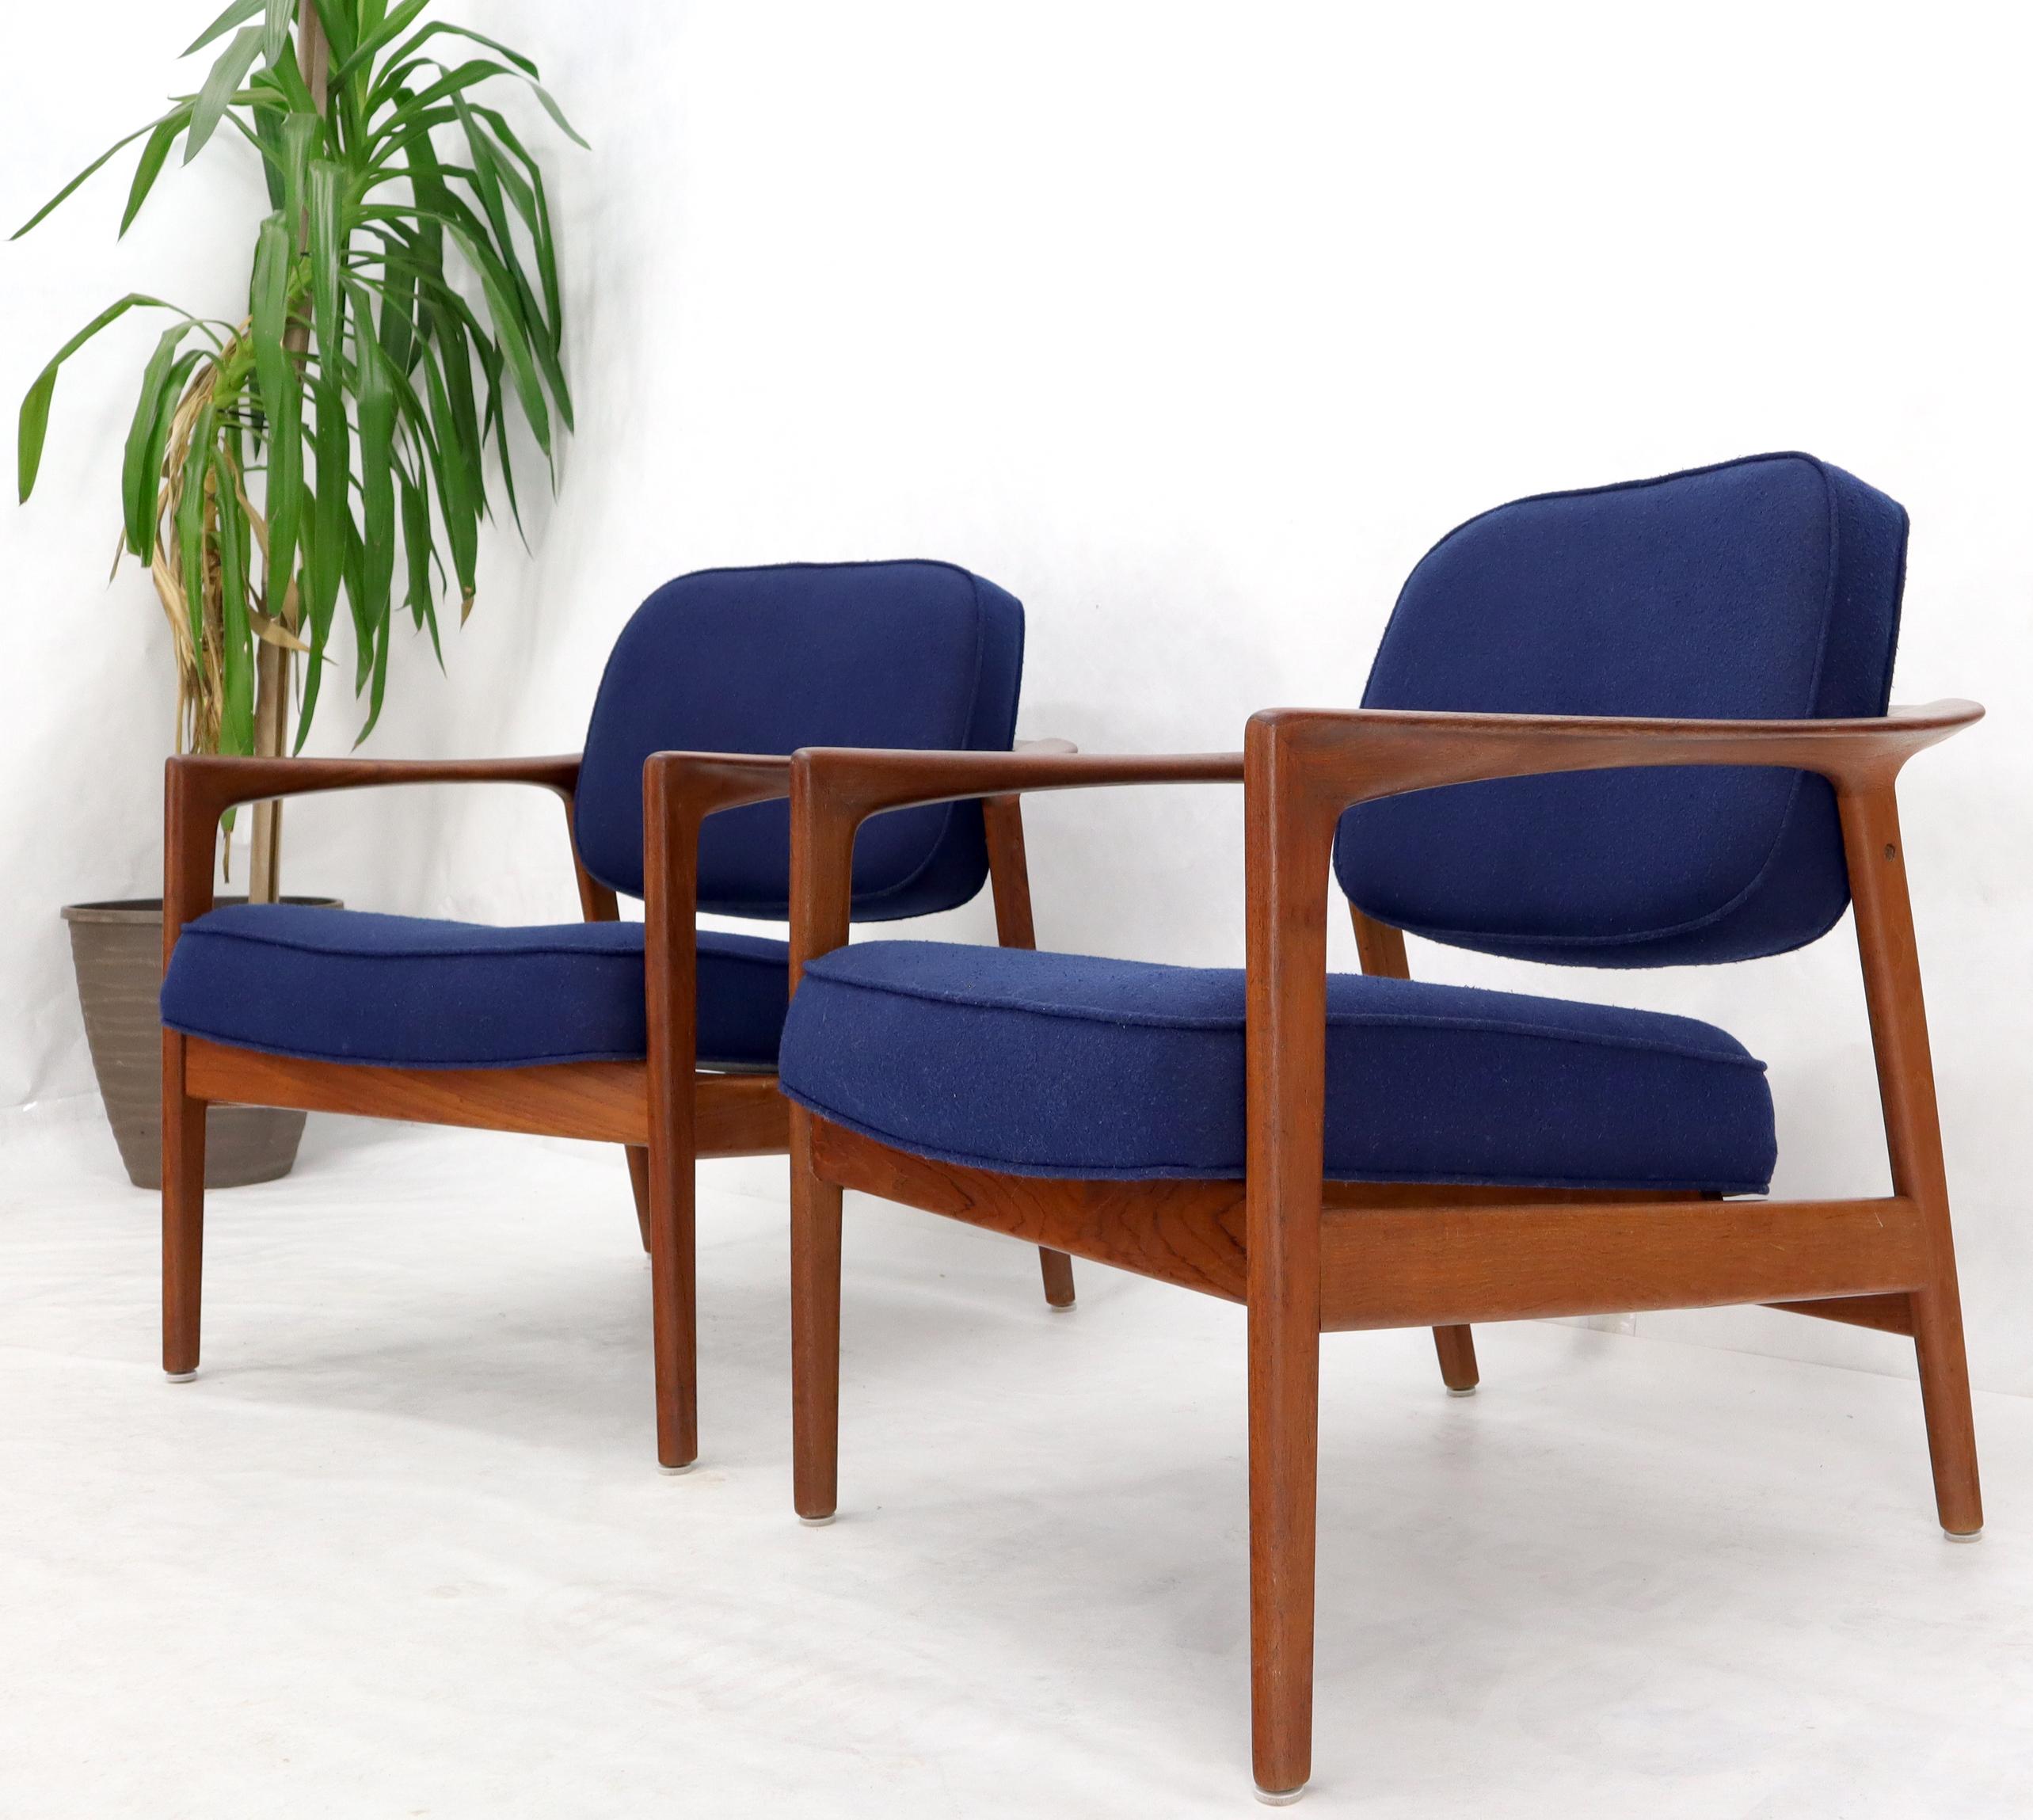 Pair of DUX Danish Modern teak lounge newly upholstery in navy blue fabric. Nice solid teak wrap around back connected arms similar to barrel back design.